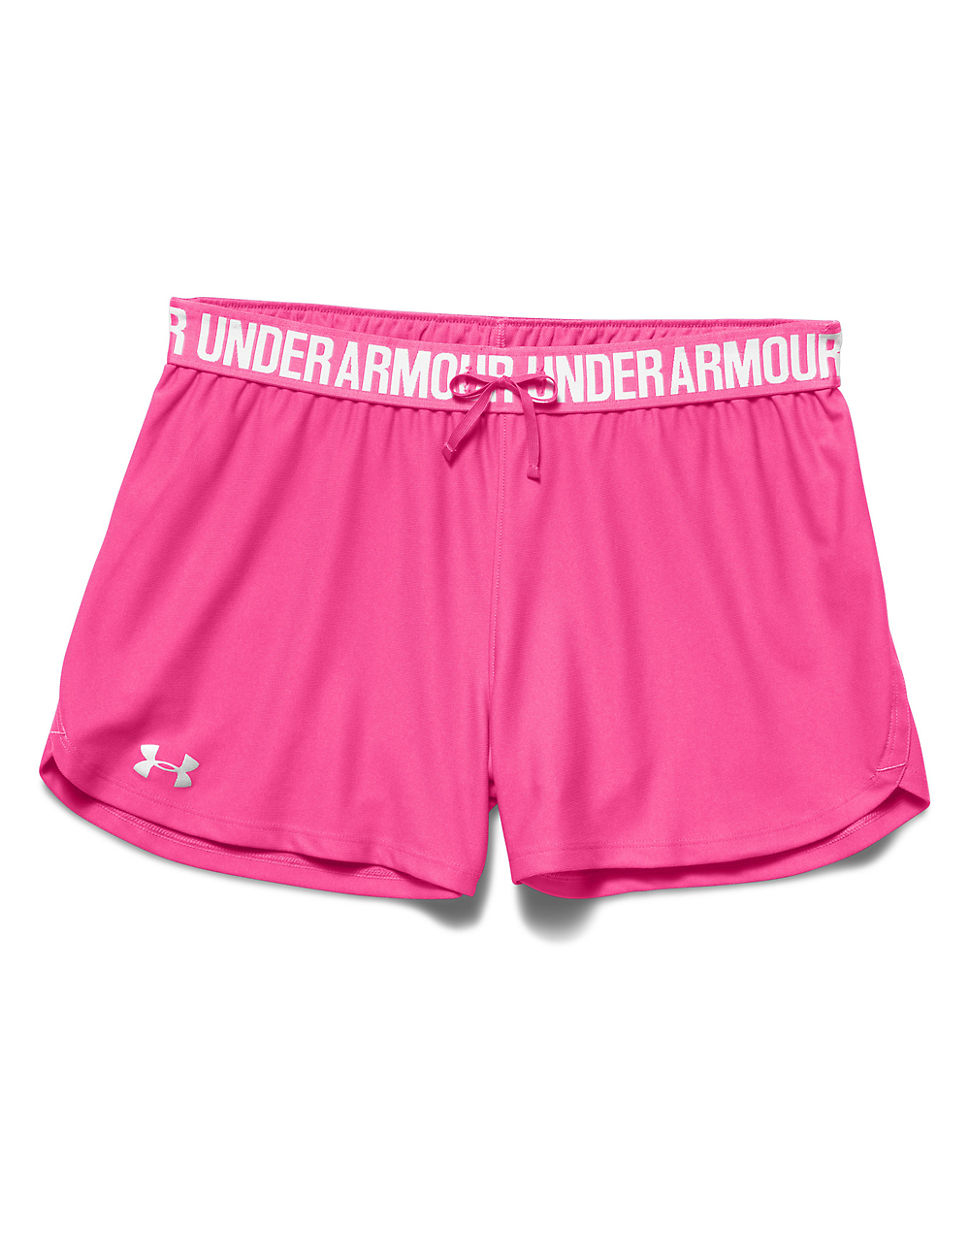 Under armour Play Up Athletic Shorts in Pink | Lyst